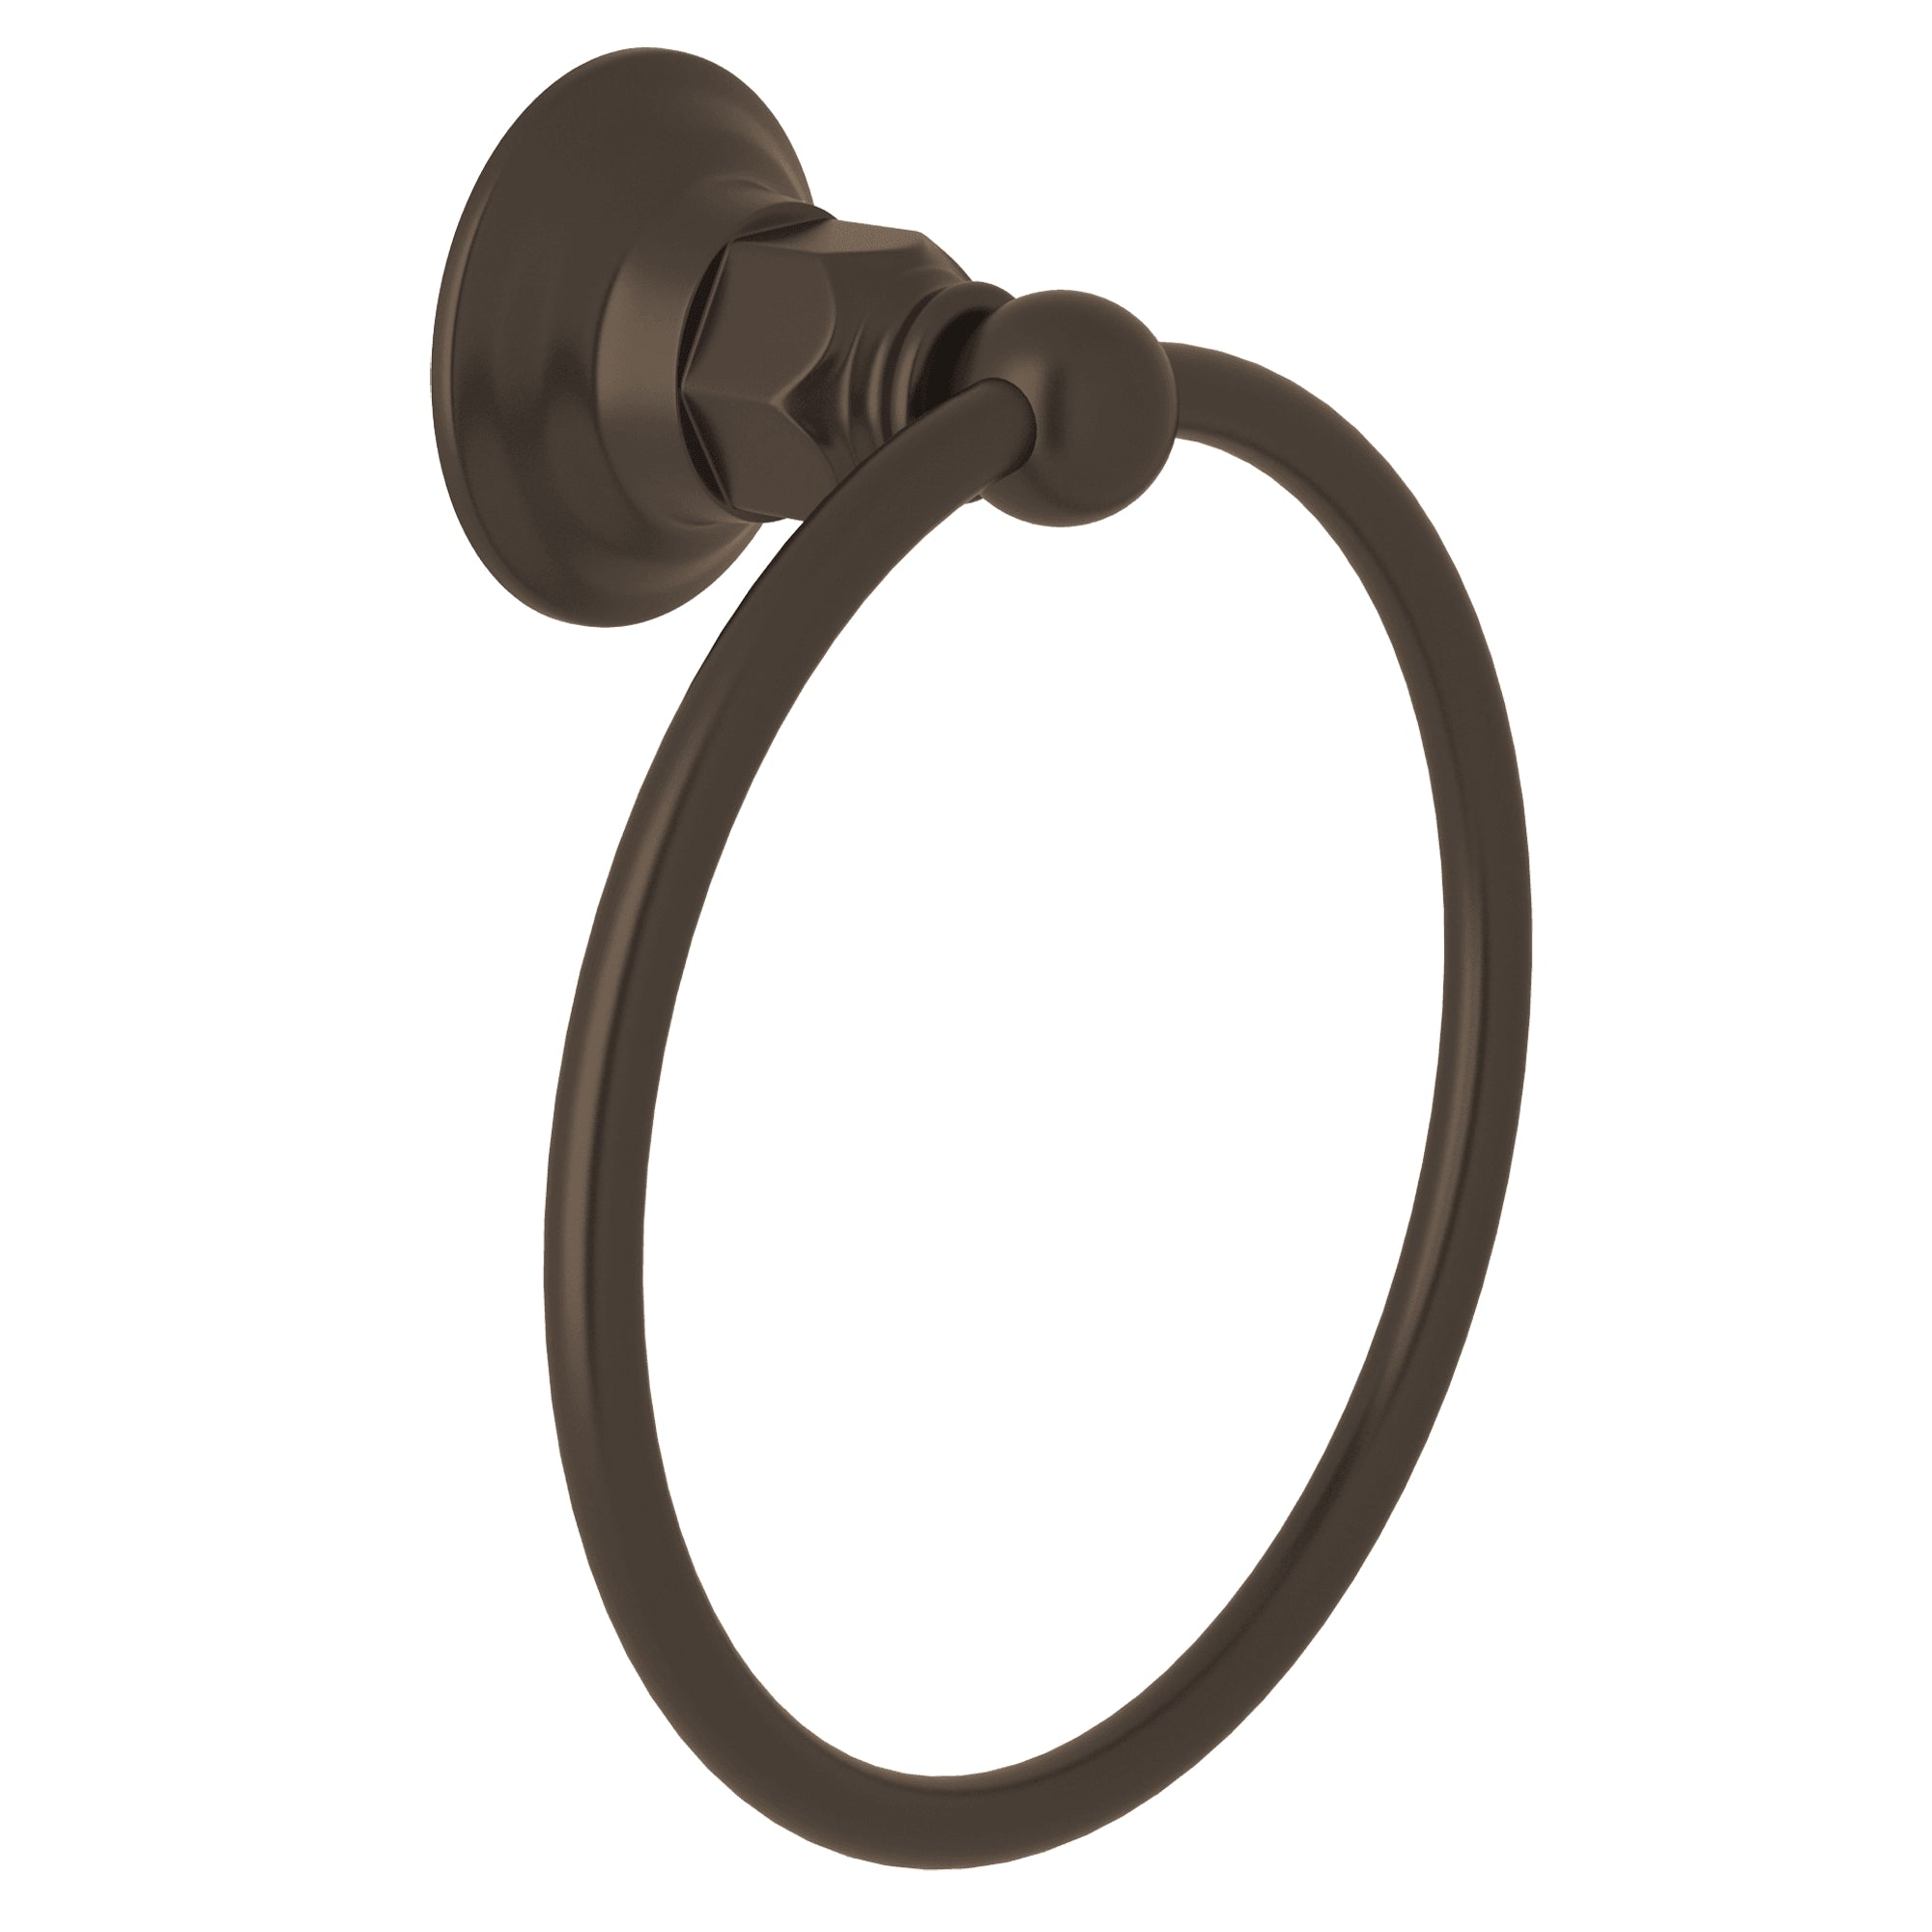 ROHL ROT4 Towel Ring